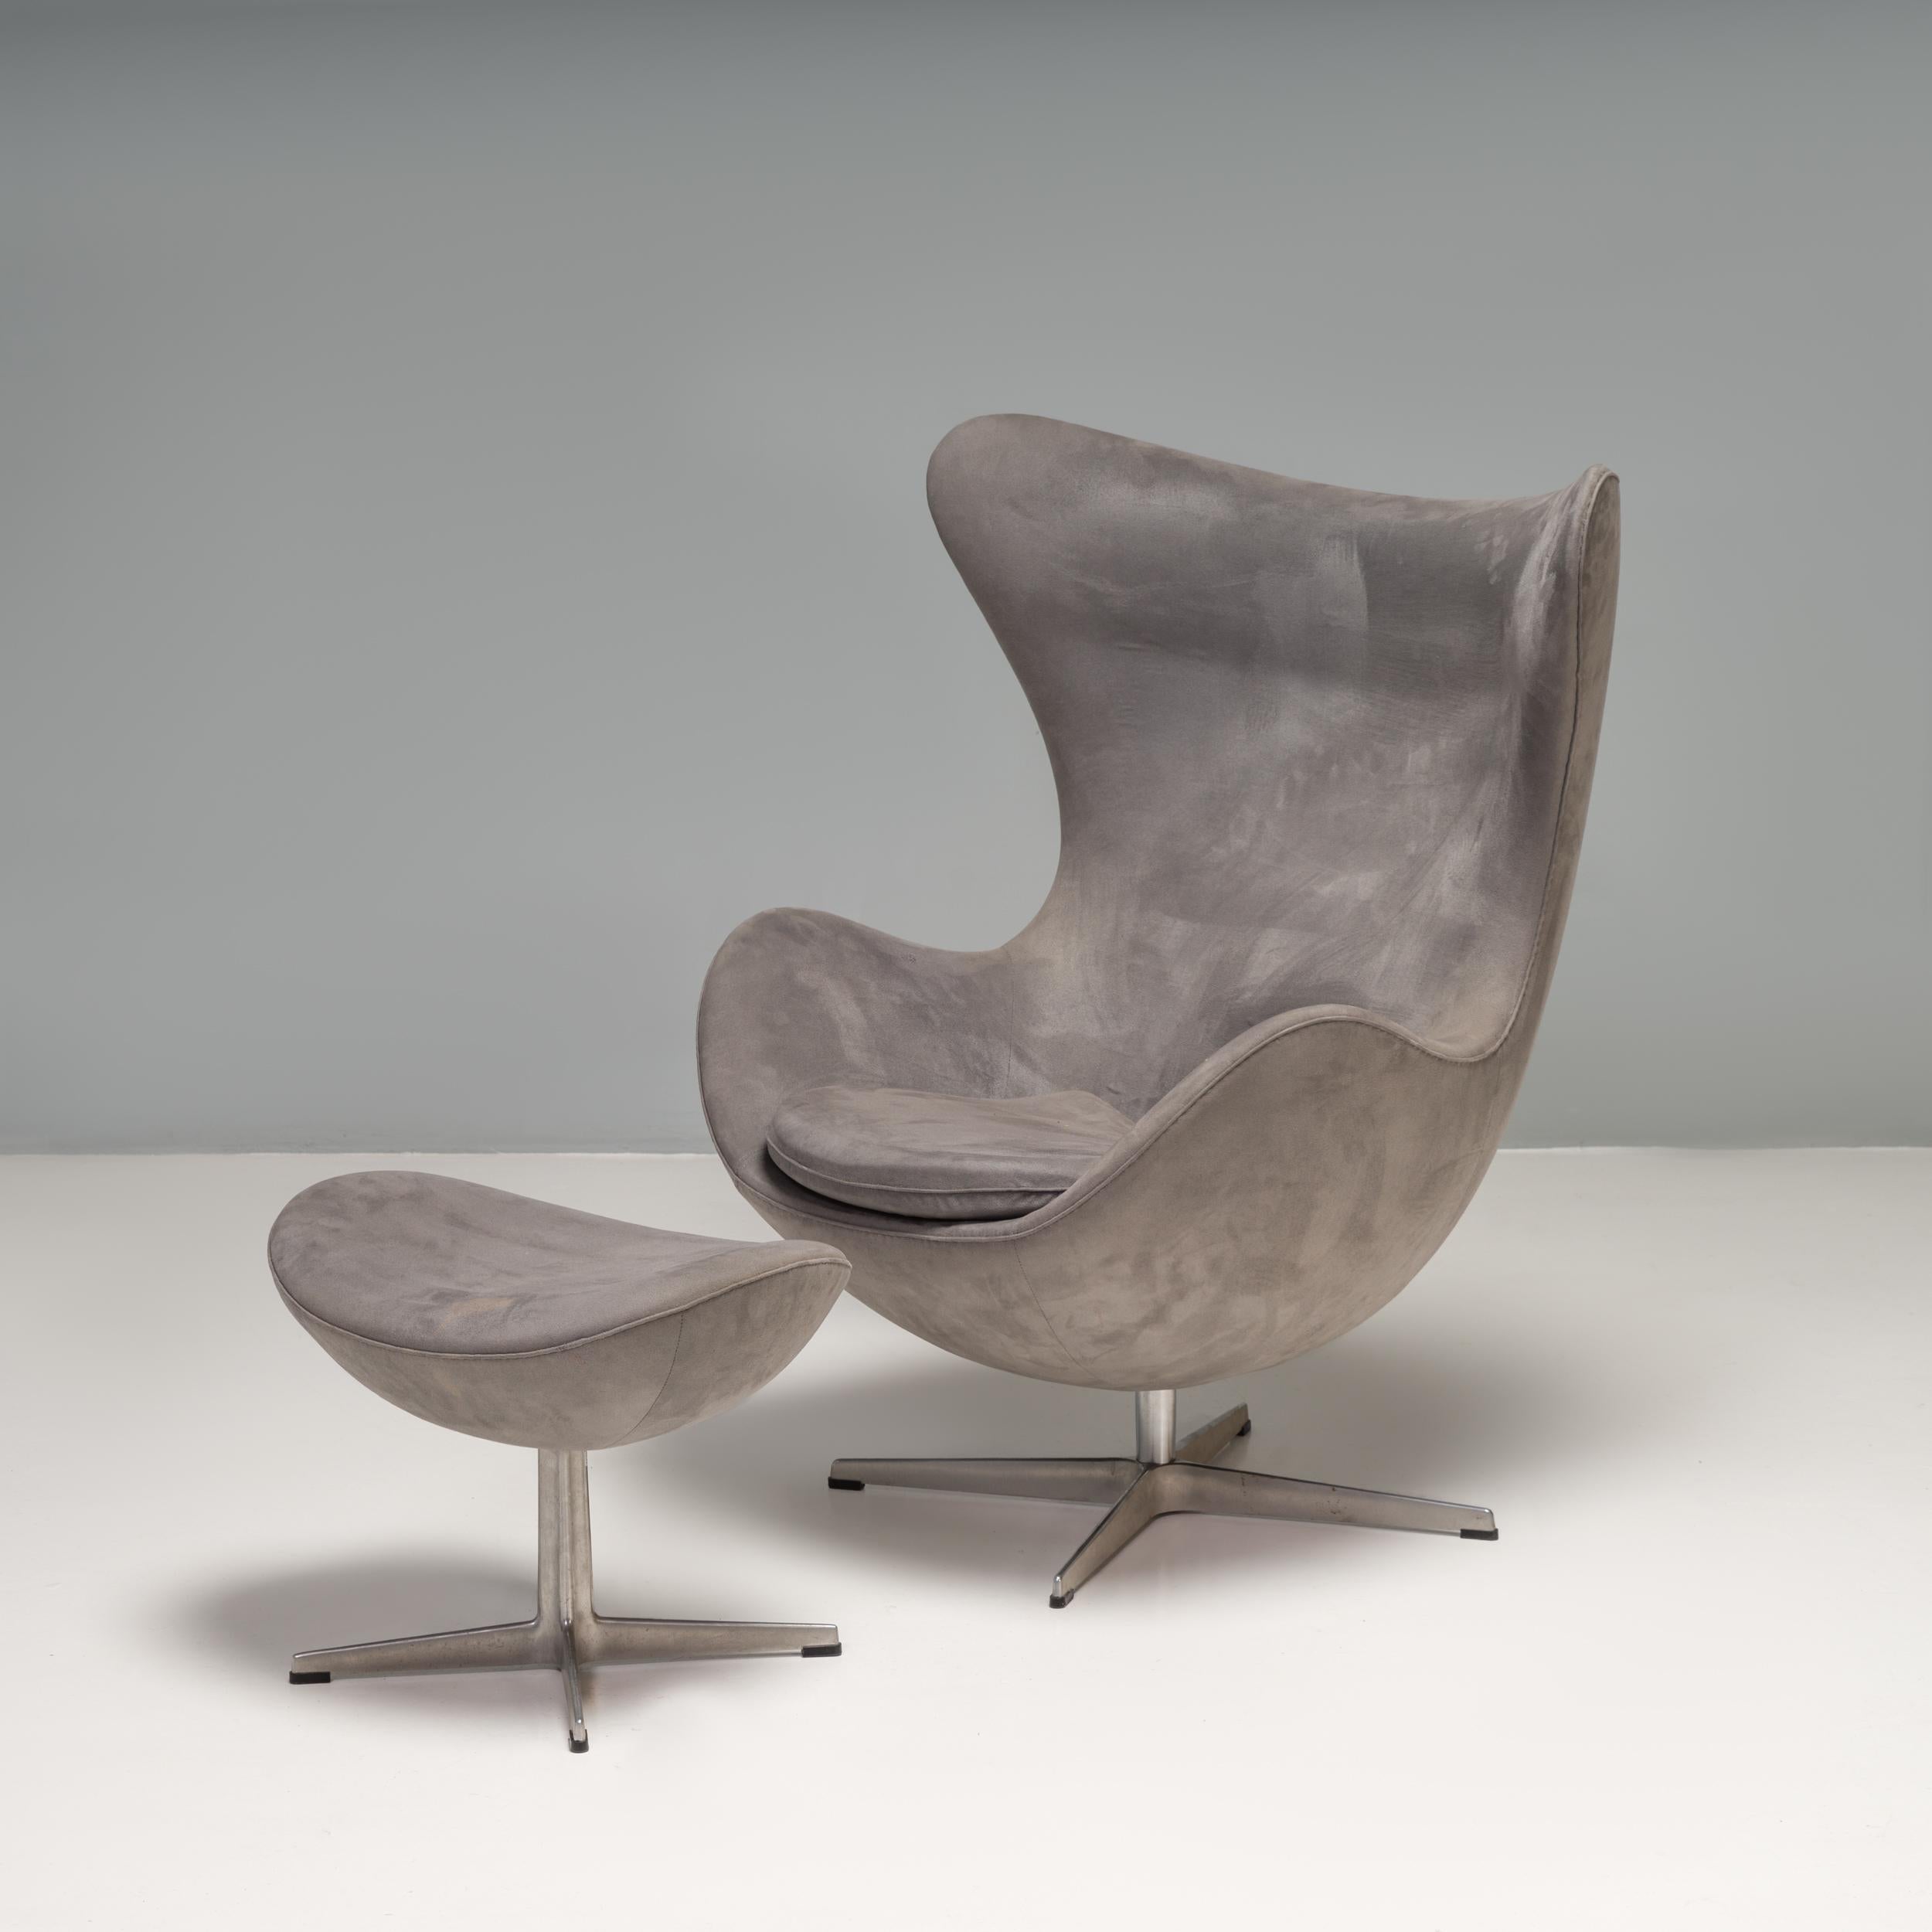 Described as a masterpiece of Danish design, the Egg chair was originally designed by Arne Jacobsen in 1958 for the SAS Royal Hotel in Copenhagen. Ground breaking at the time, the chair has gone on to become a true design classic and is still